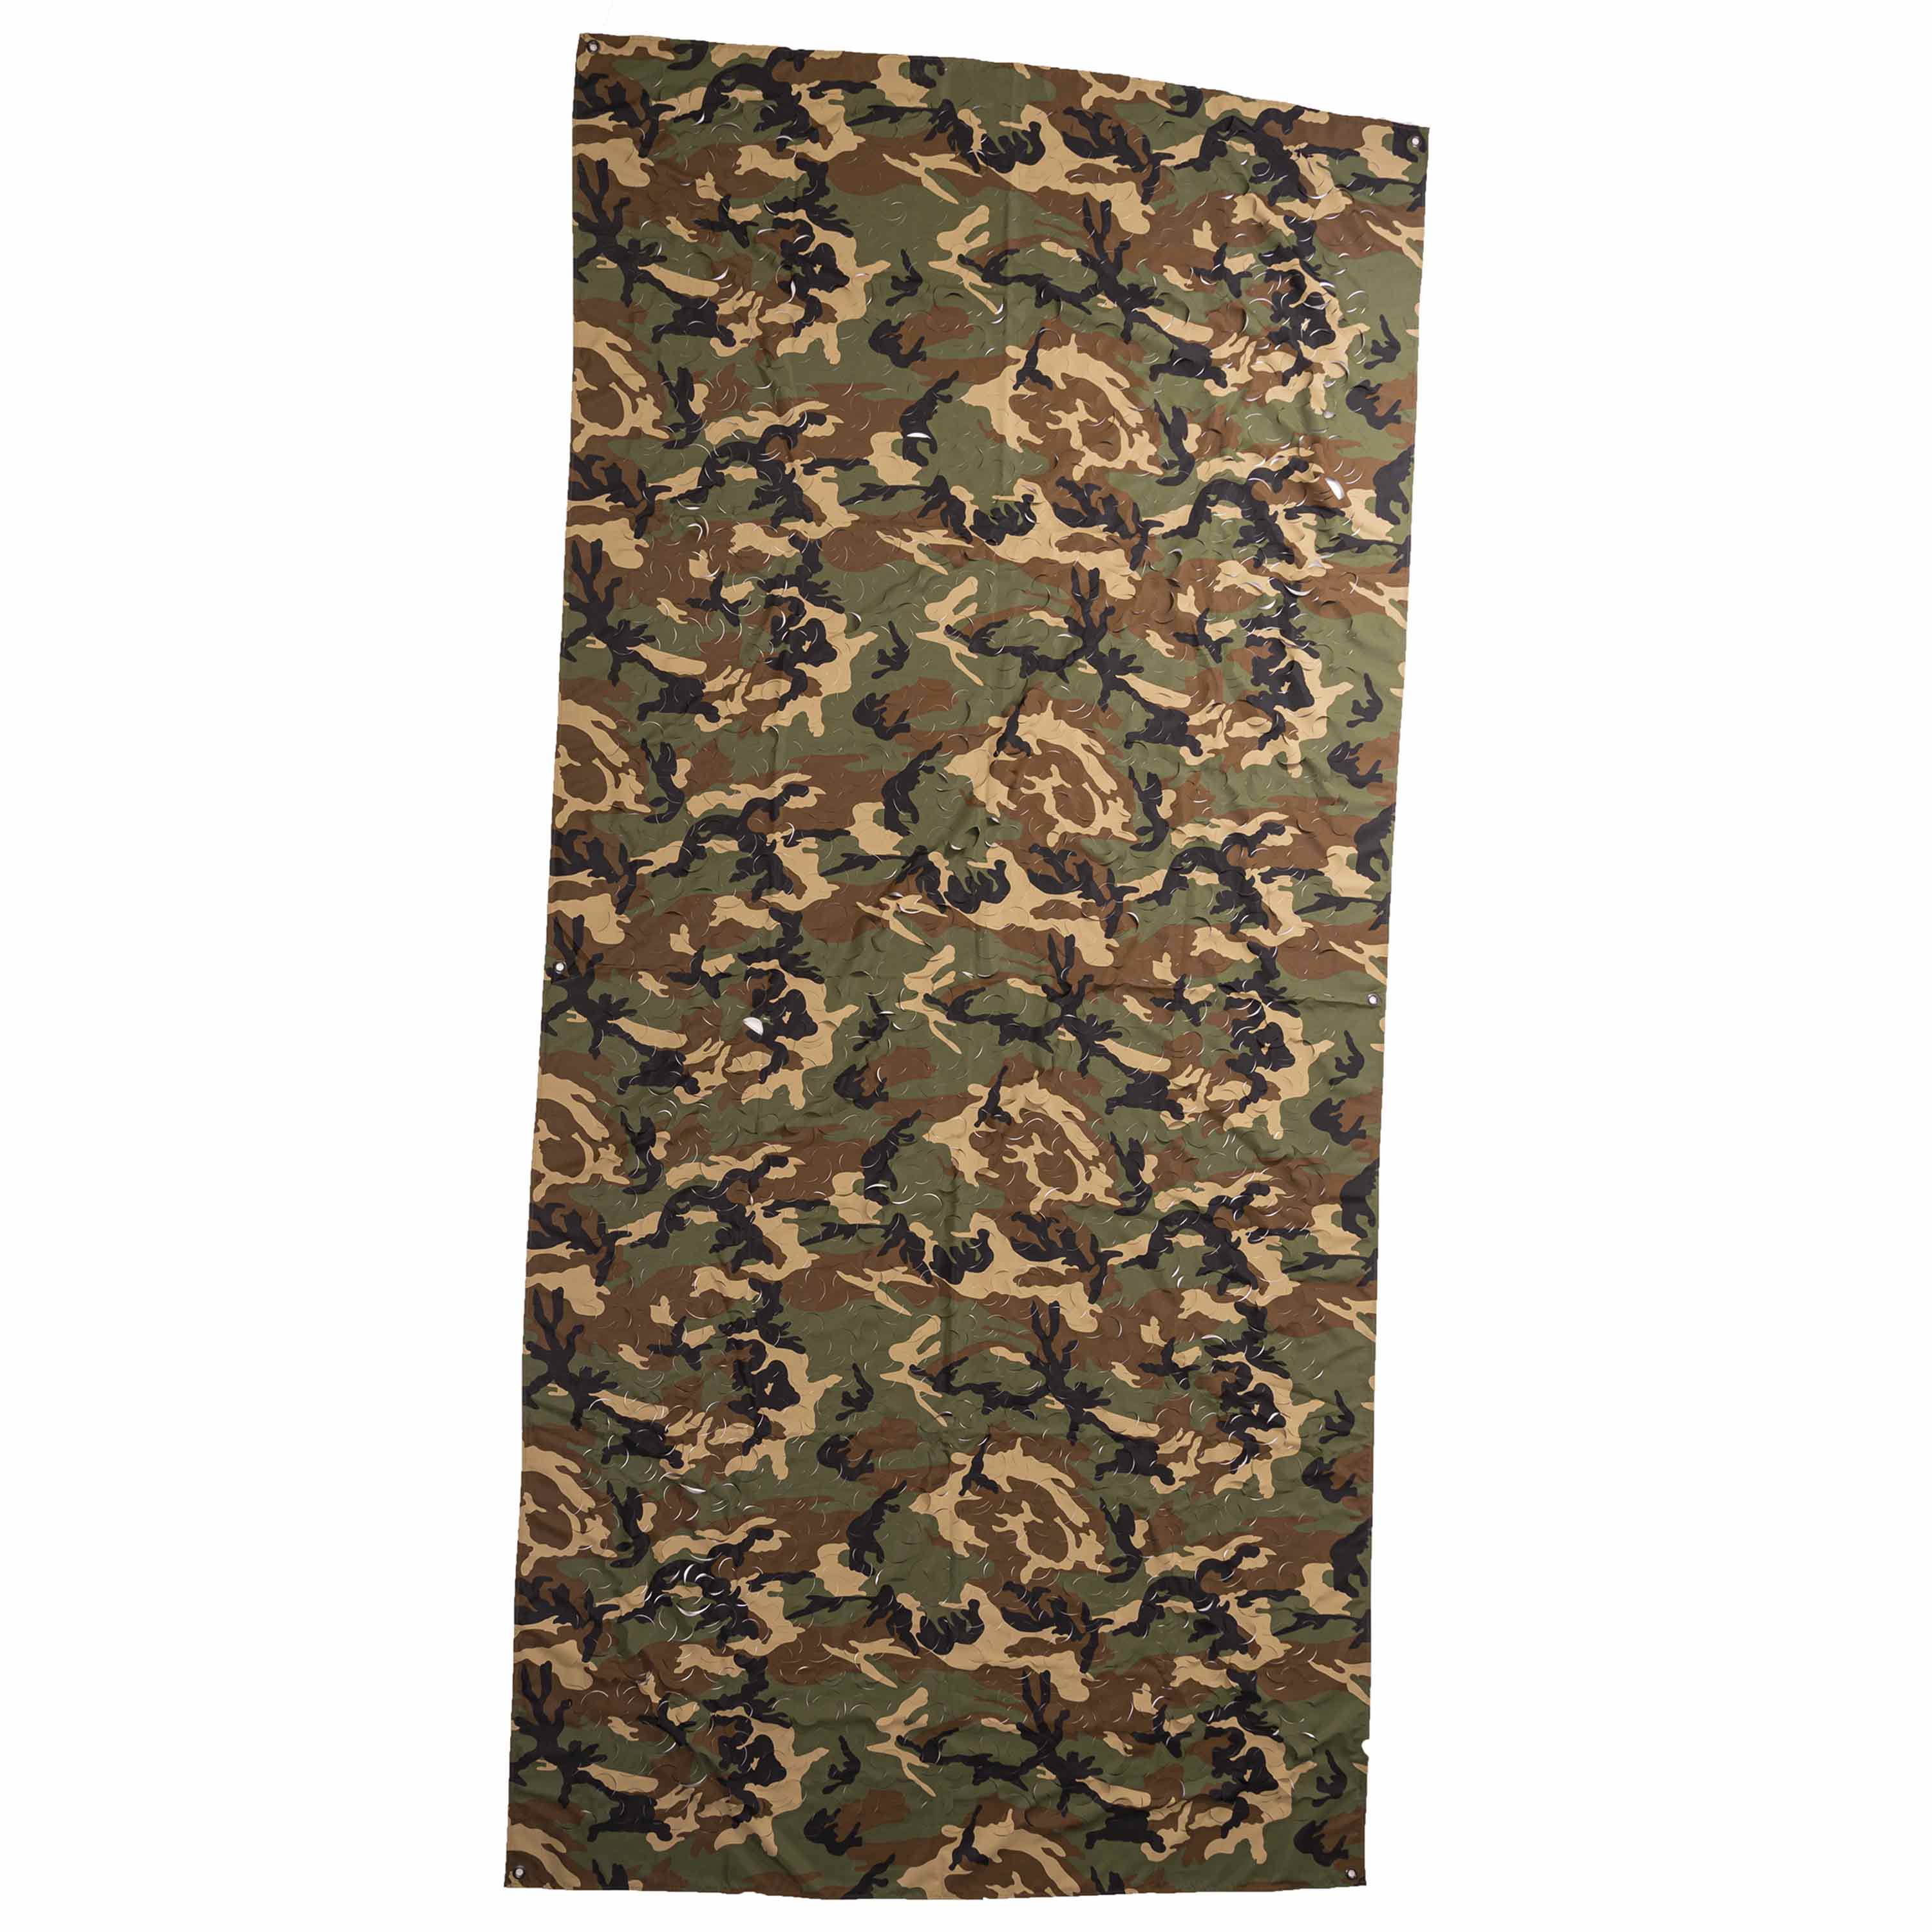 Purchase the Mil-Tec Laser Cut Nylon Camouflage Net 1.5 x 3.0 m